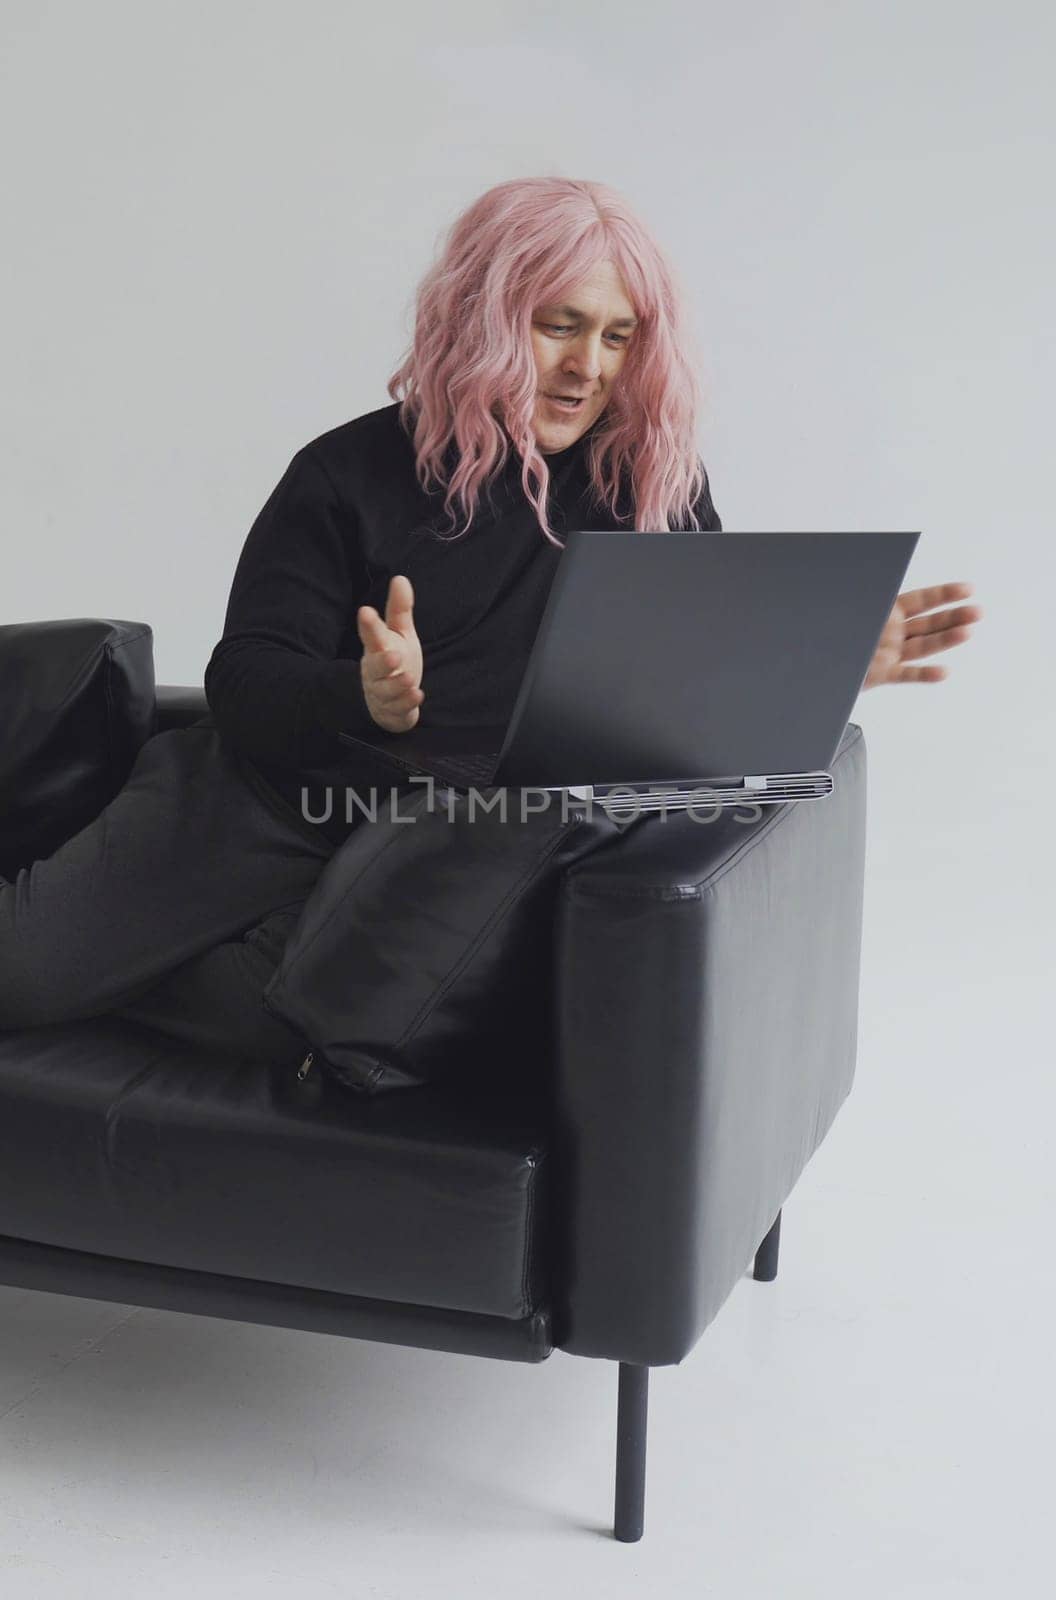 Portrait of a smiling man in a pink wig, sits on a sofa, communicates via video link on a laptop. White background. Vertical frame.